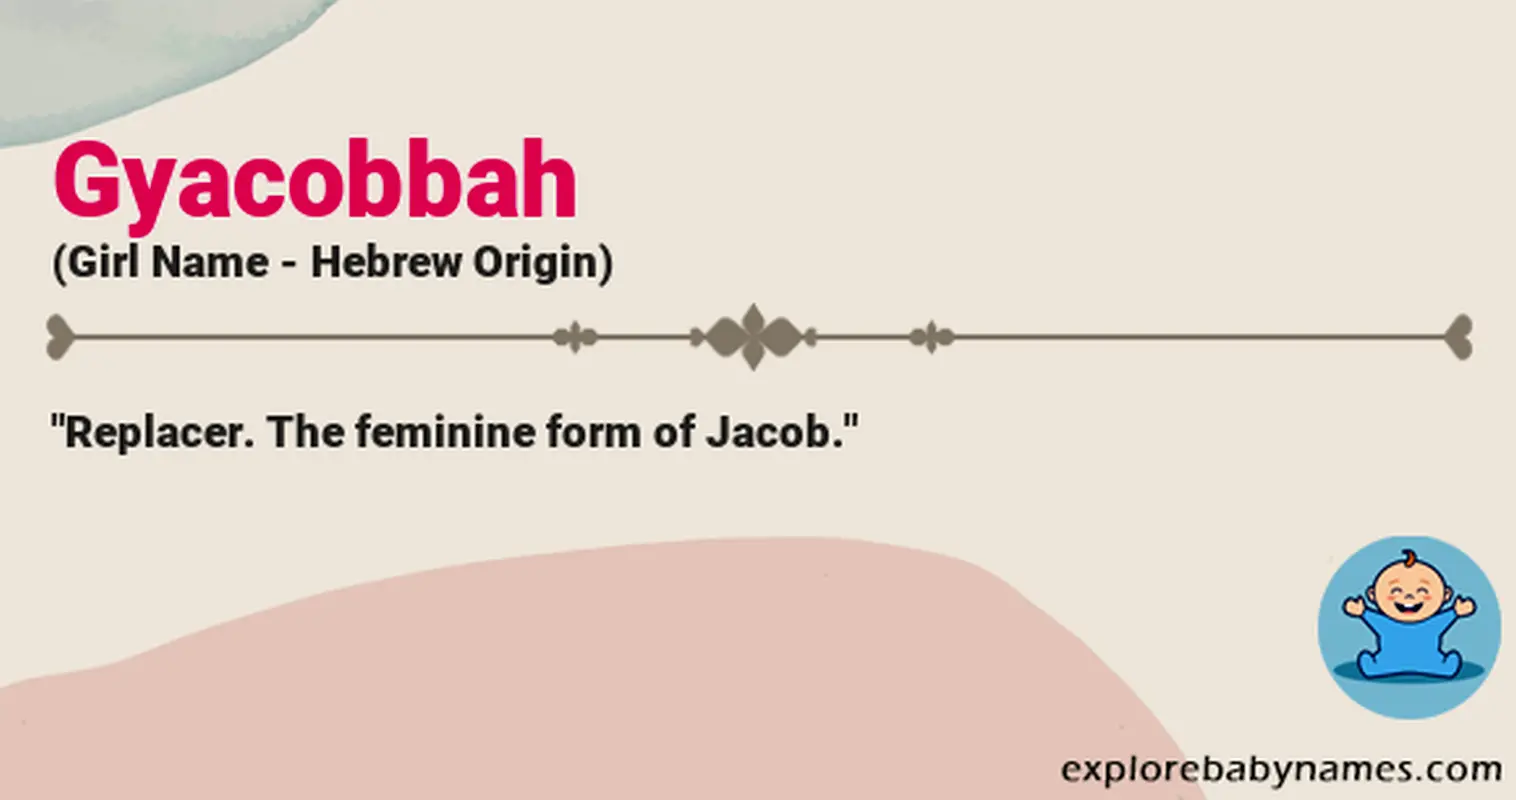 Meaning of Gyacobbah